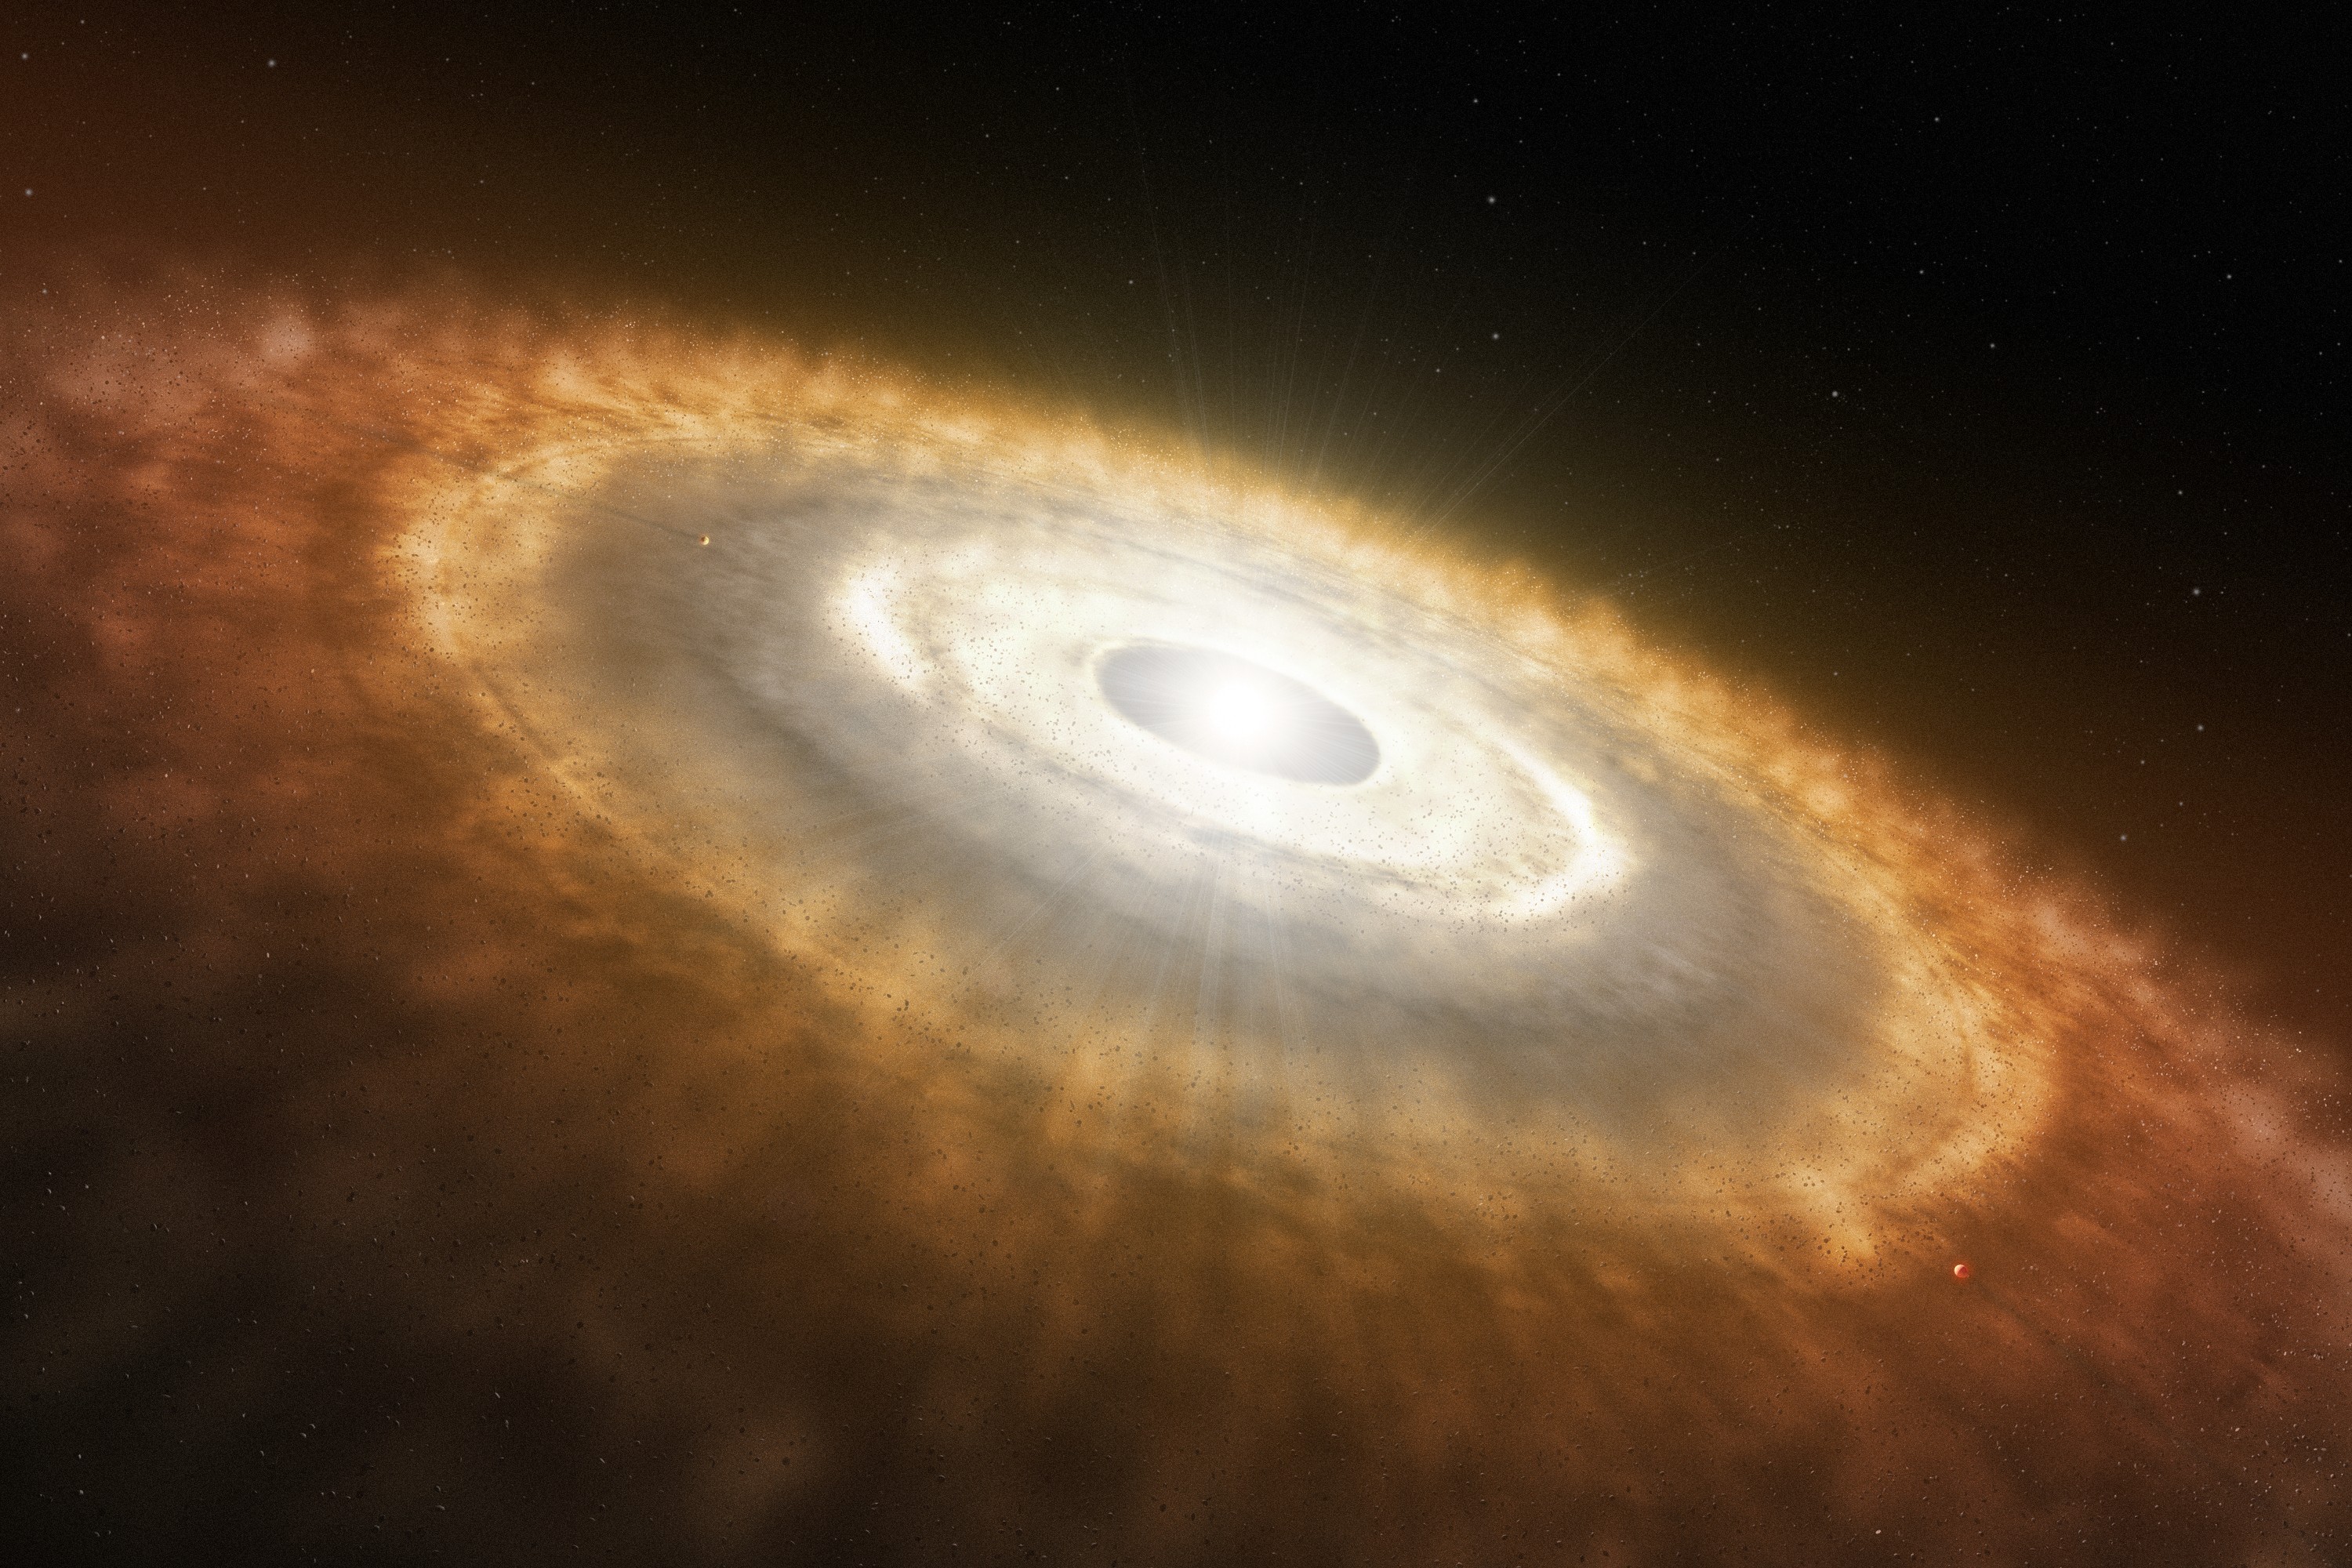 Artist’s_Impression_of_a_Baby_Star_Still_Surrounded_by_a_Protoplanetary_Disc